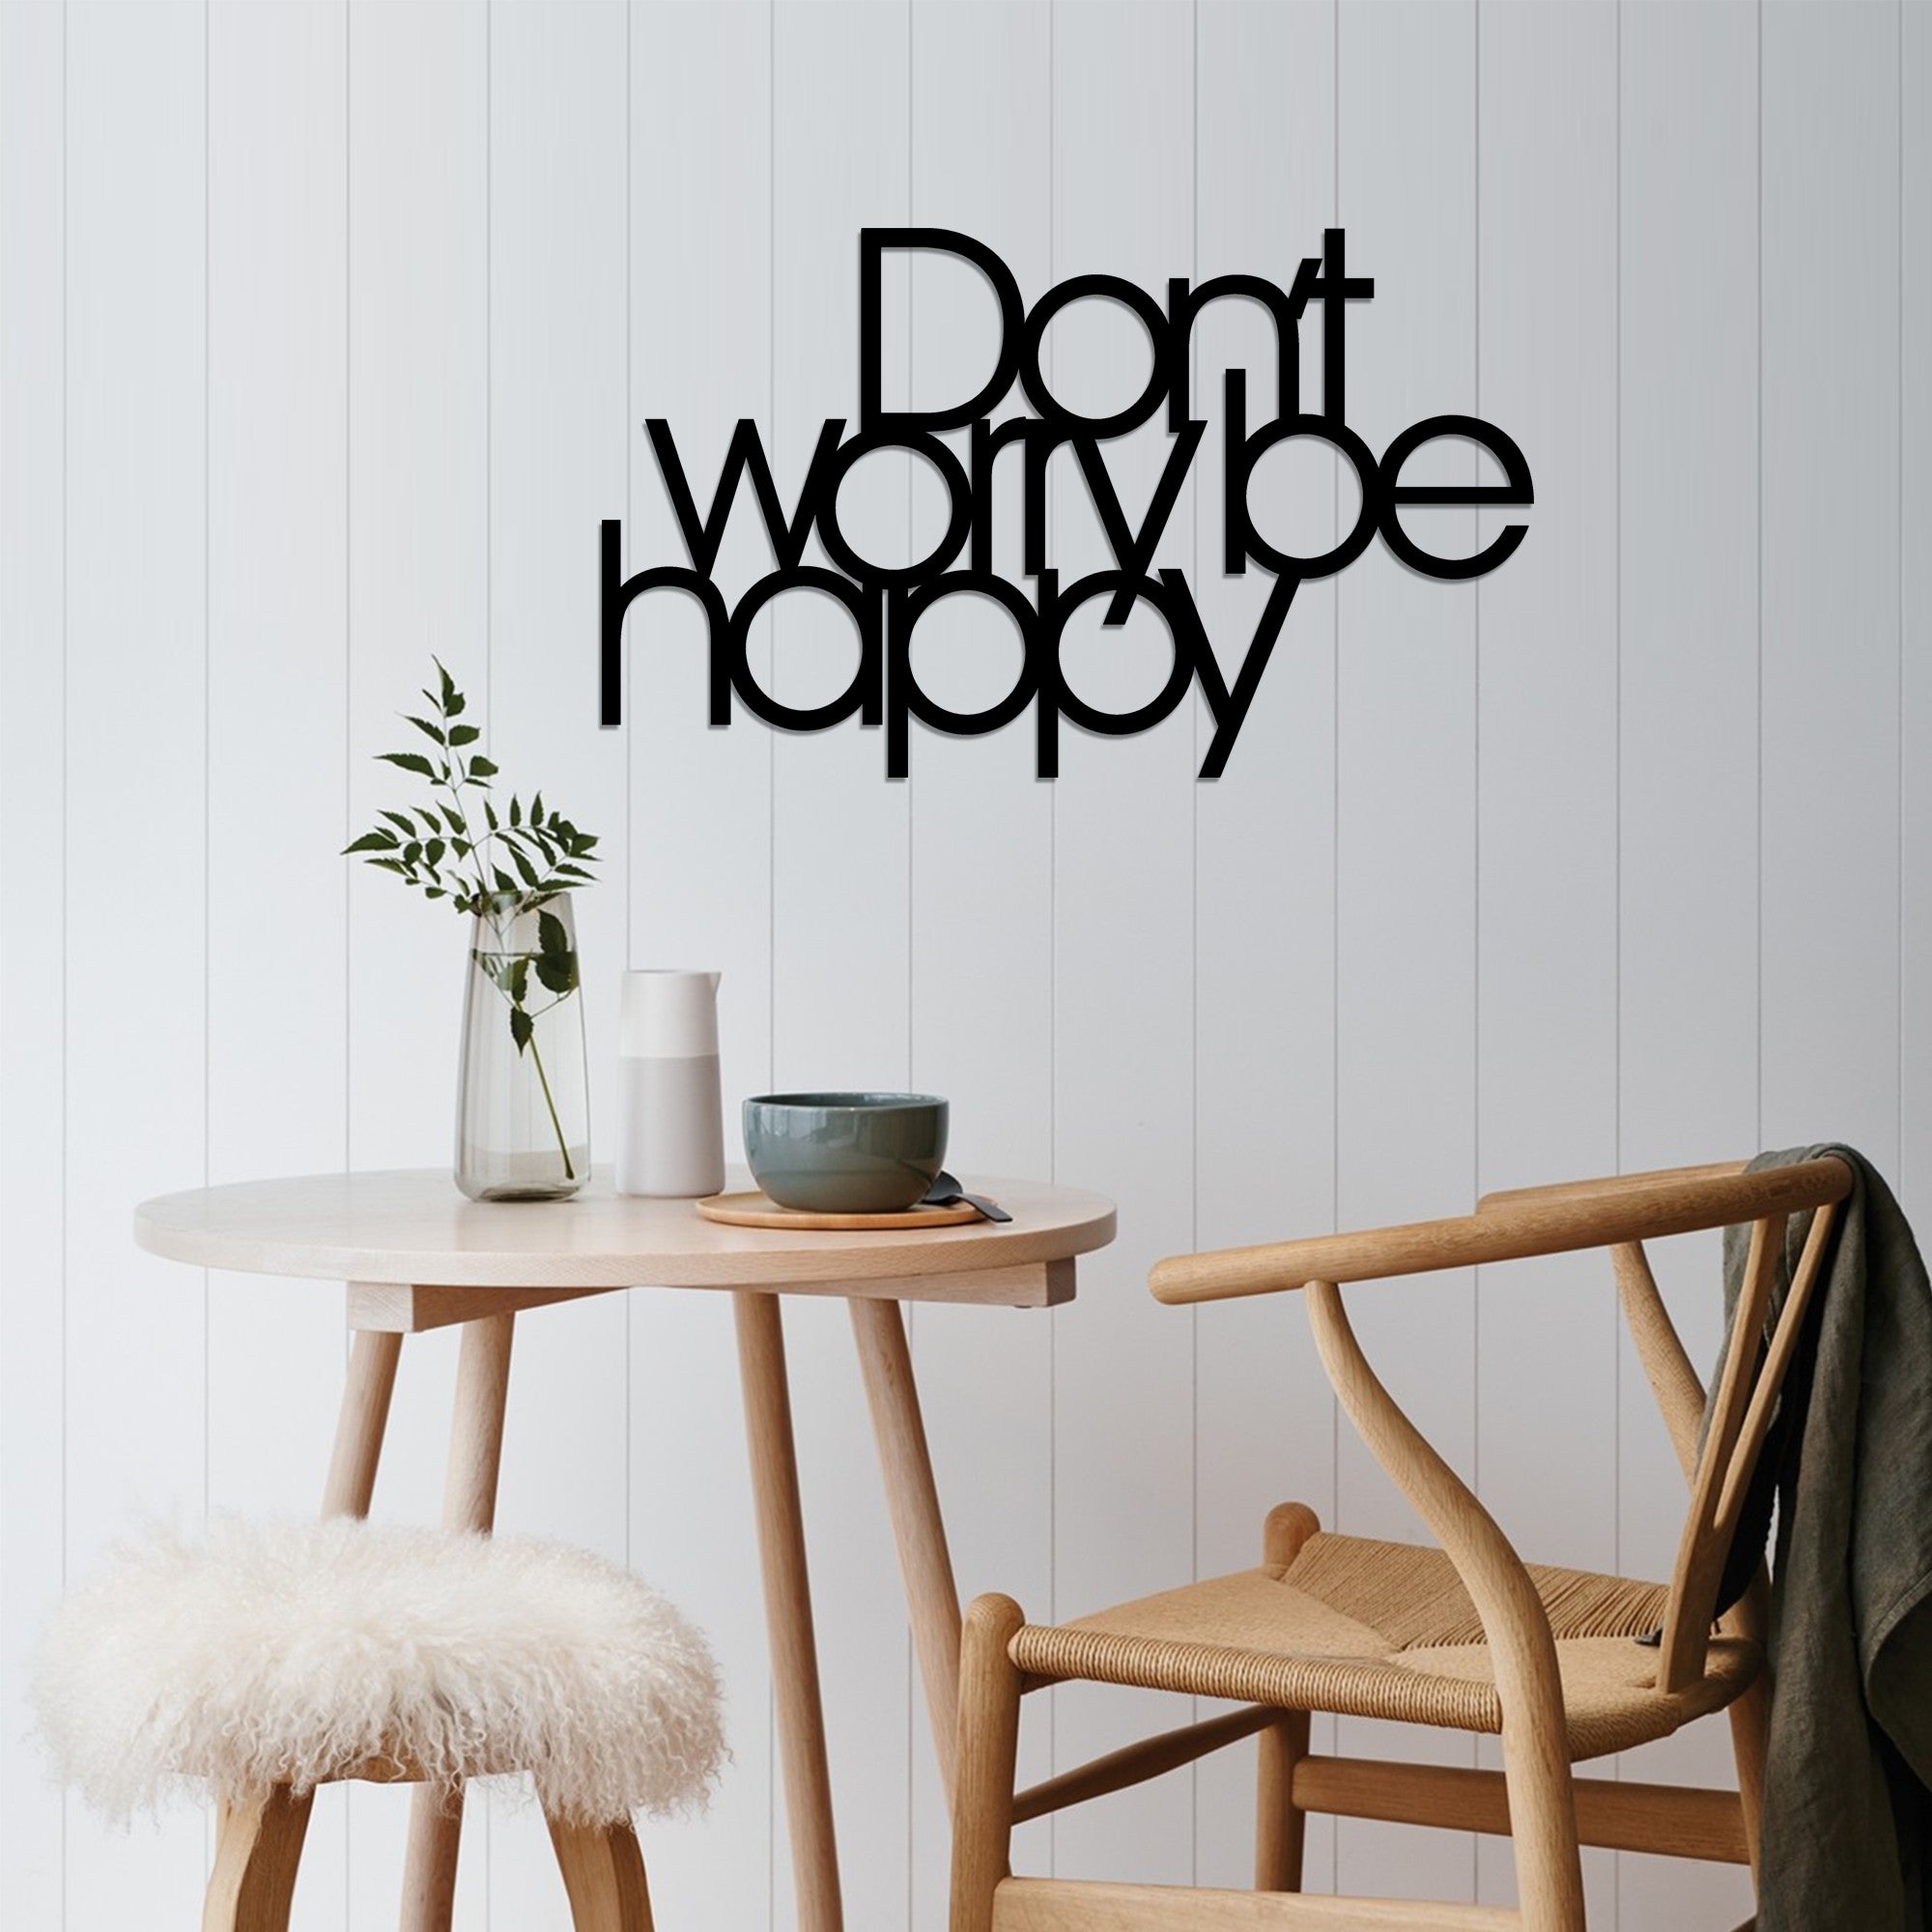 DONT WORRY BE HAPPY - BLACK